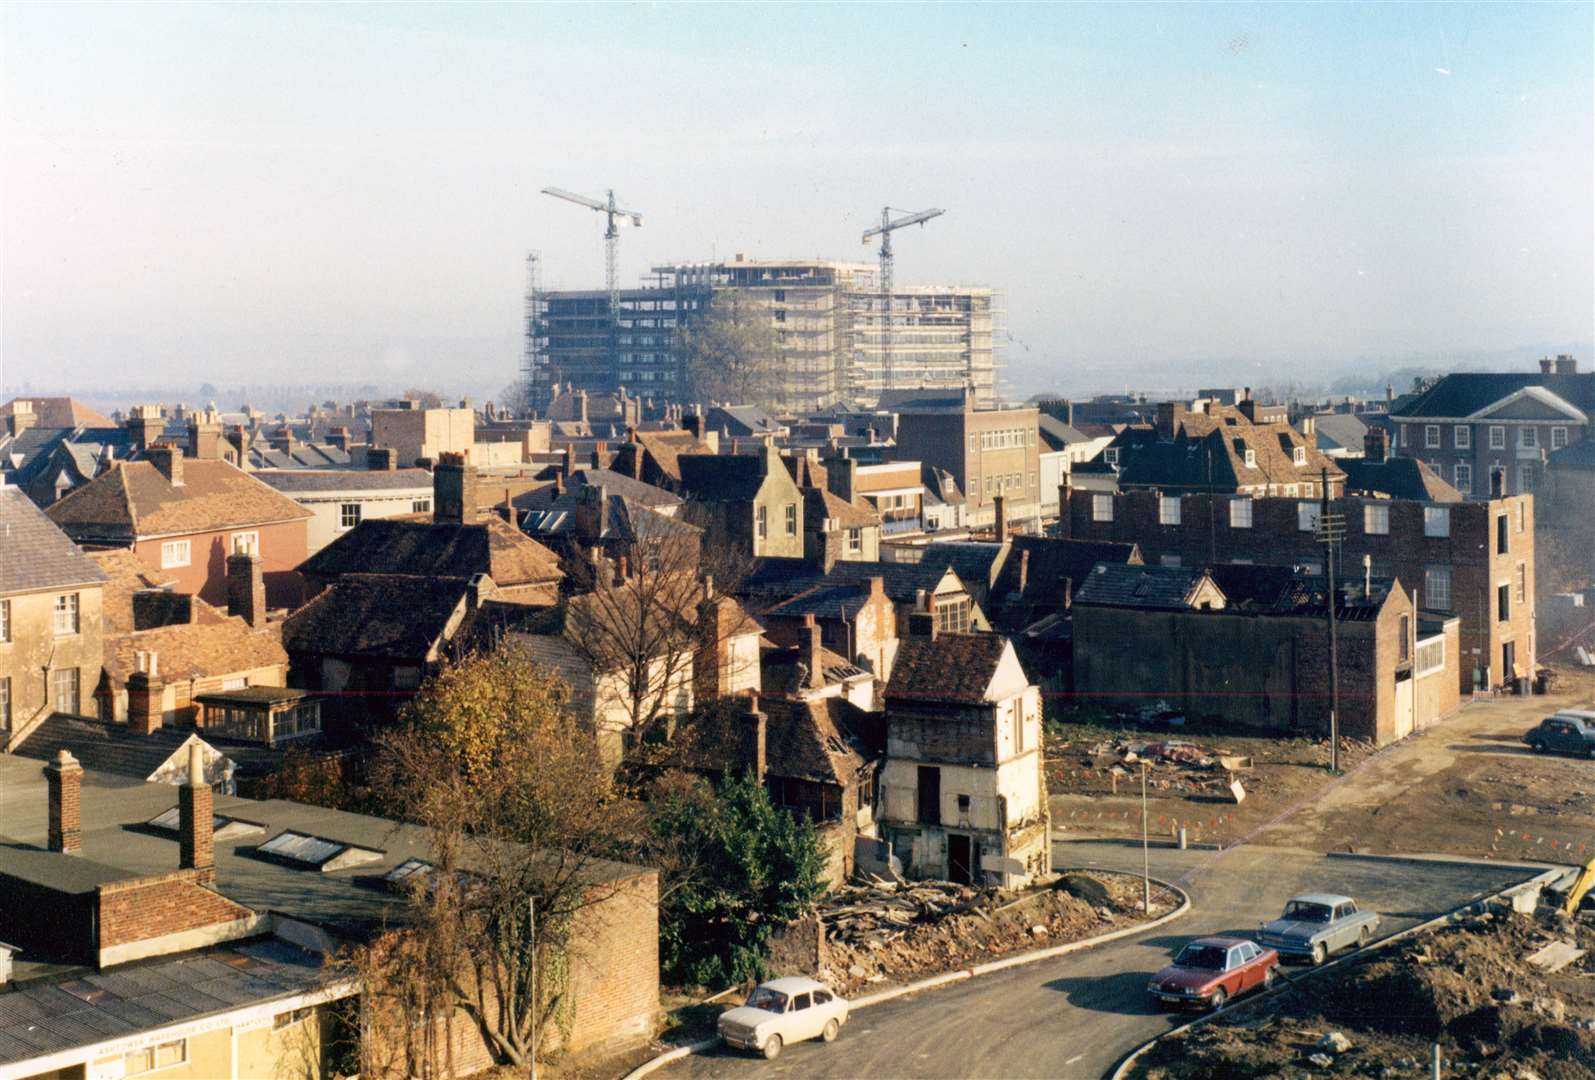 Charter House has towered over Ashford for decades - it is pictured here while under construction in 1973. Picture: Steve Salter